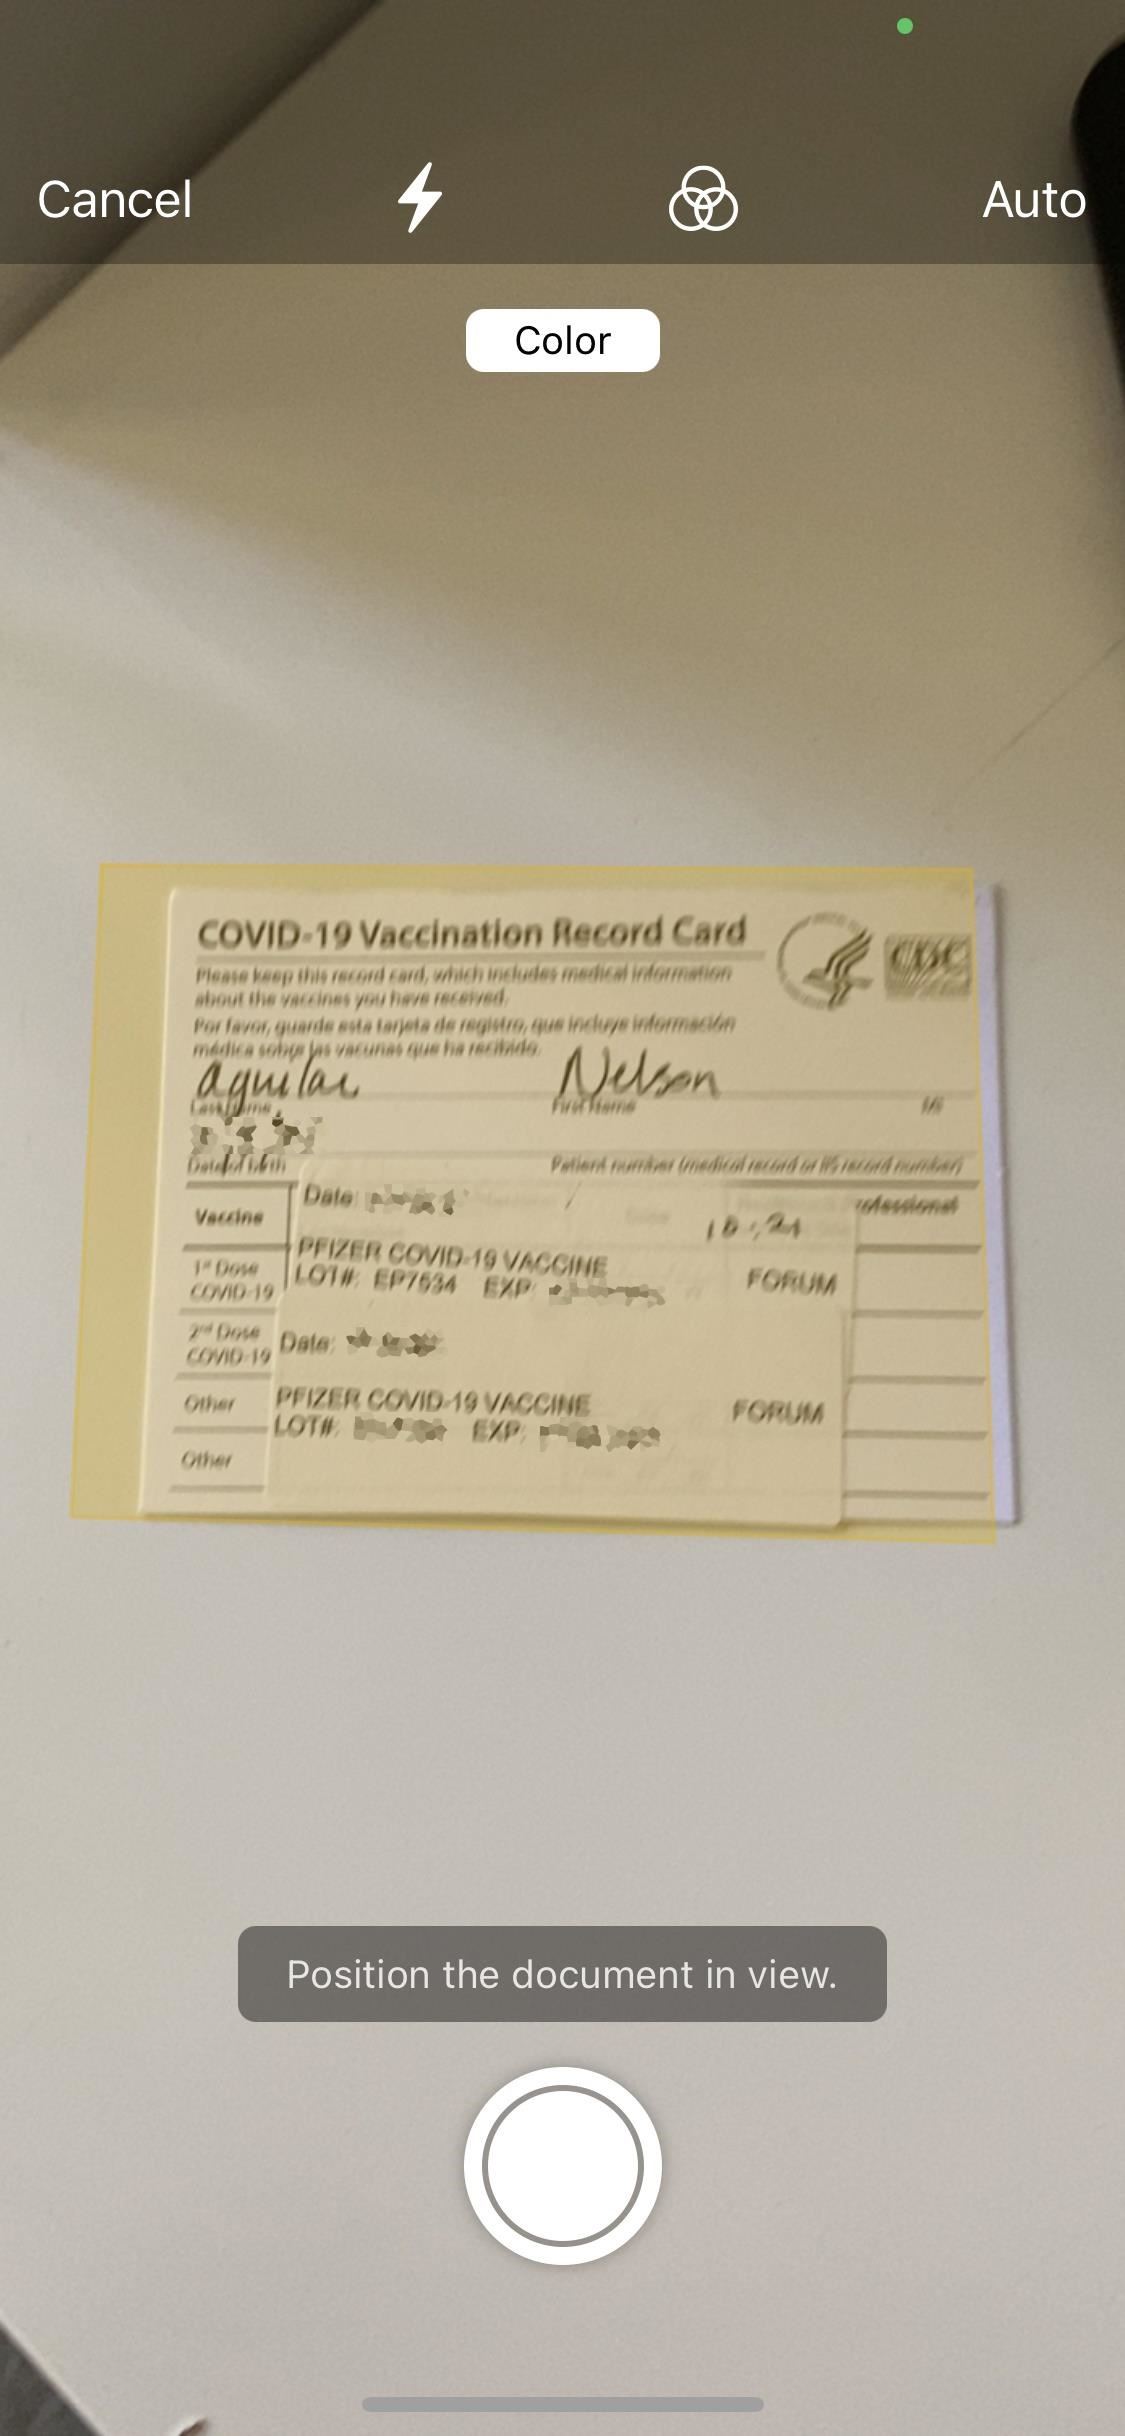 Digitize Your COVID-19 Vaccination Record Card on Your Phone for Easy Access Anywhere